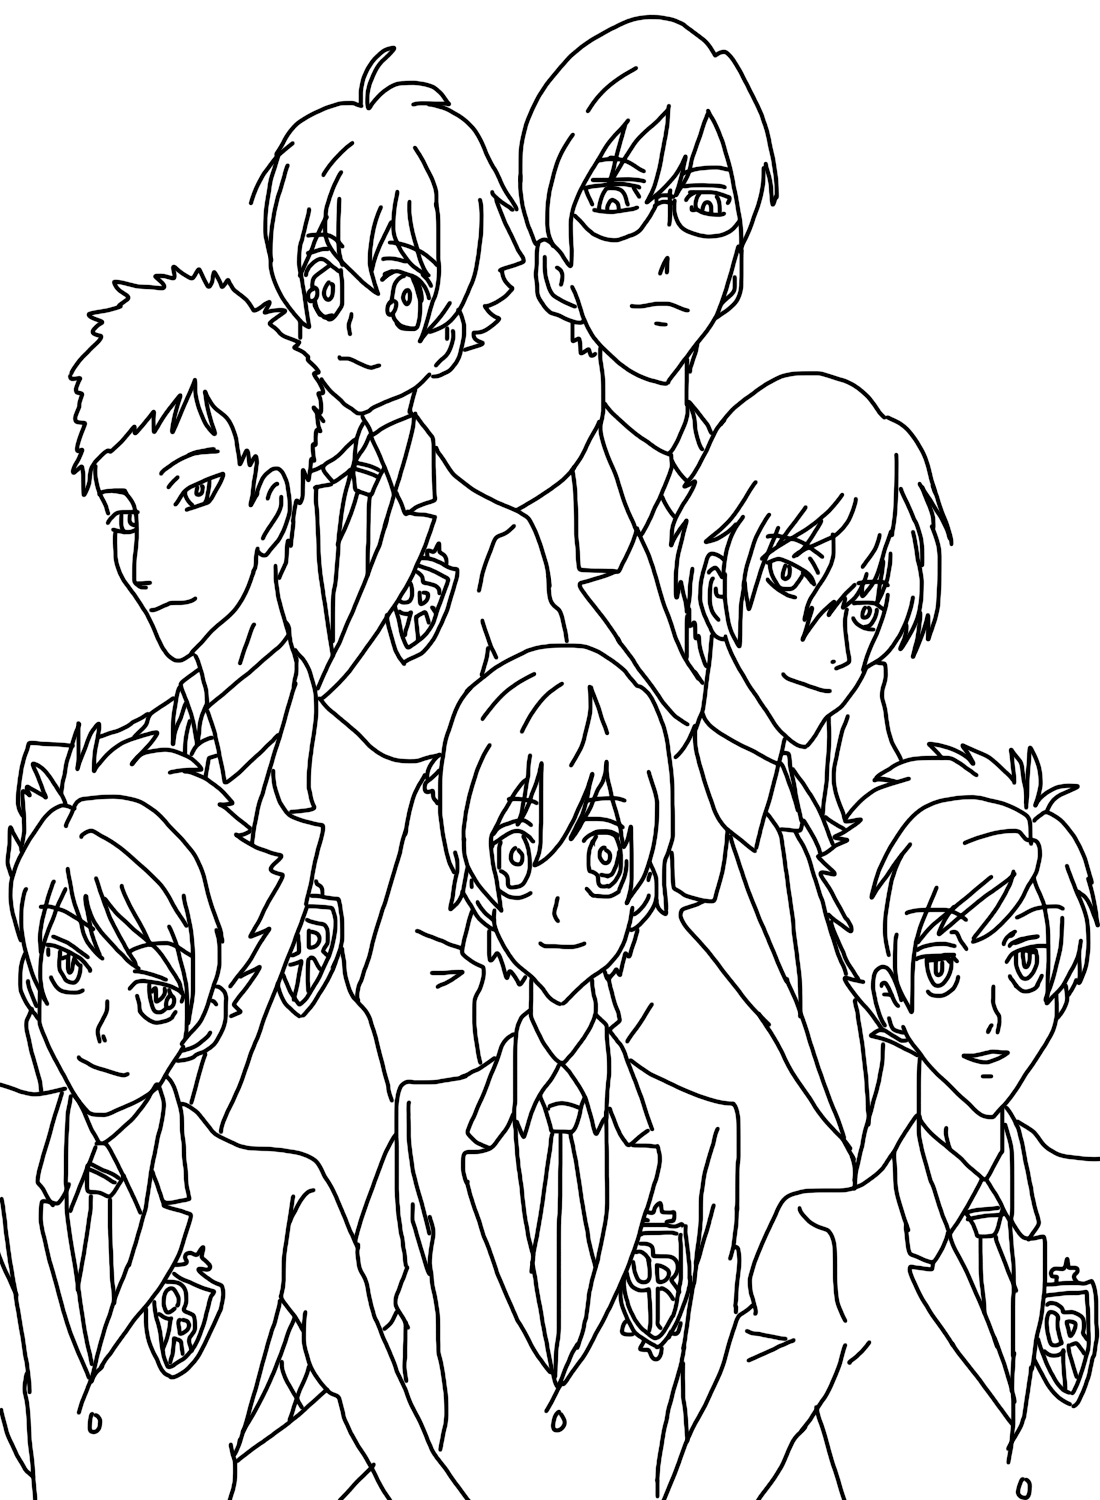 Ouran High School Host Club Coloring Page from Haruhi Fujioka